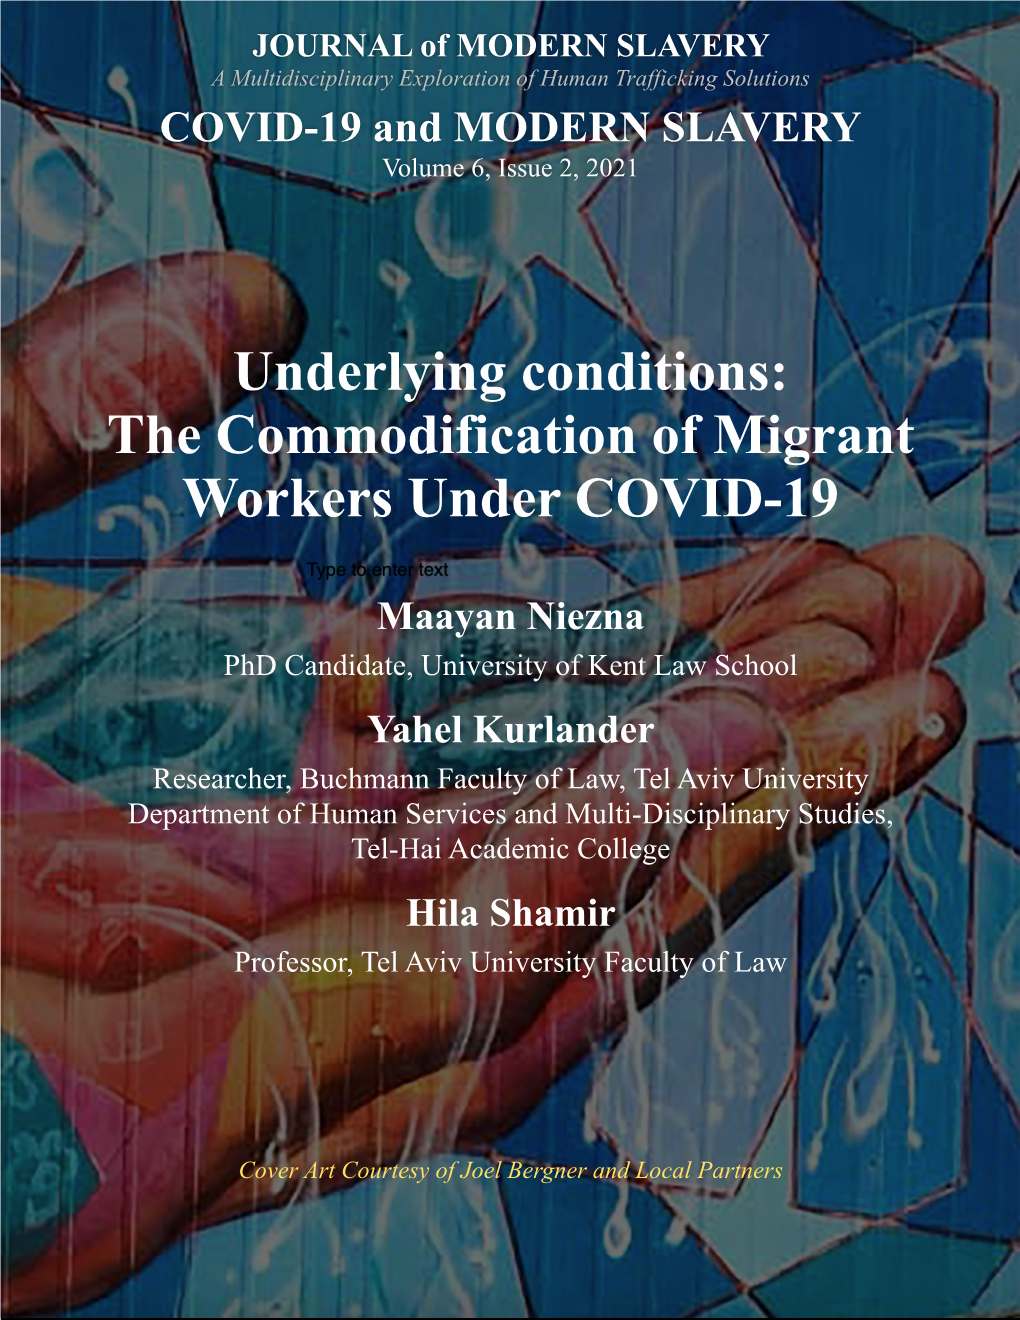 The Commodification of Migrant Workers Under COVID-19